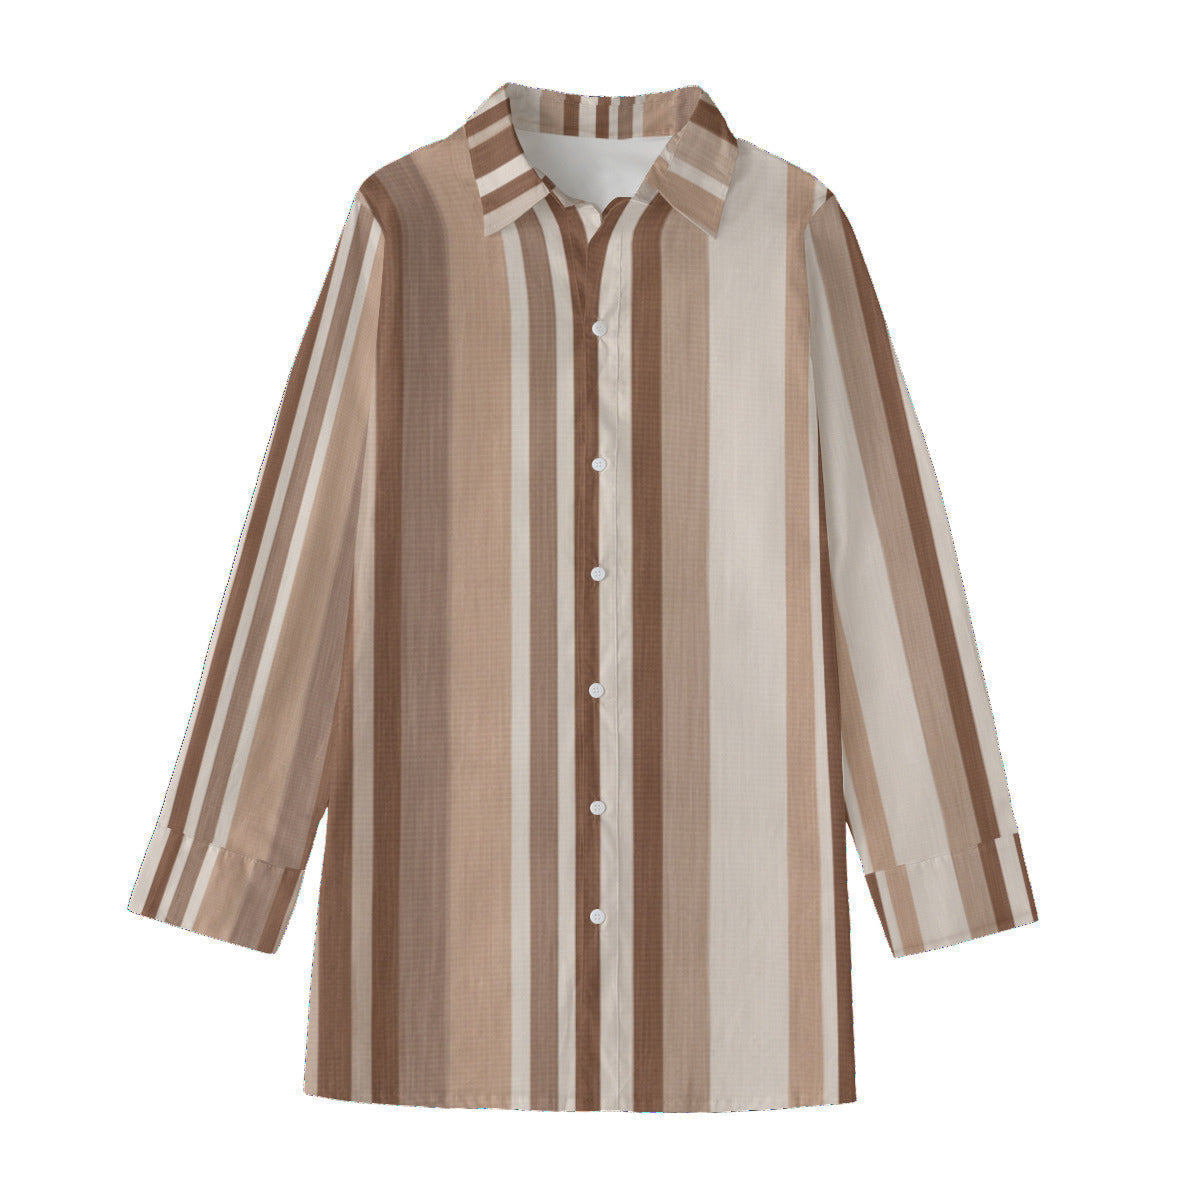 Earth Tones Stripes Button Up Cotton Blouse | Hypoallergenic - Allergy Friendly - Naturally Free